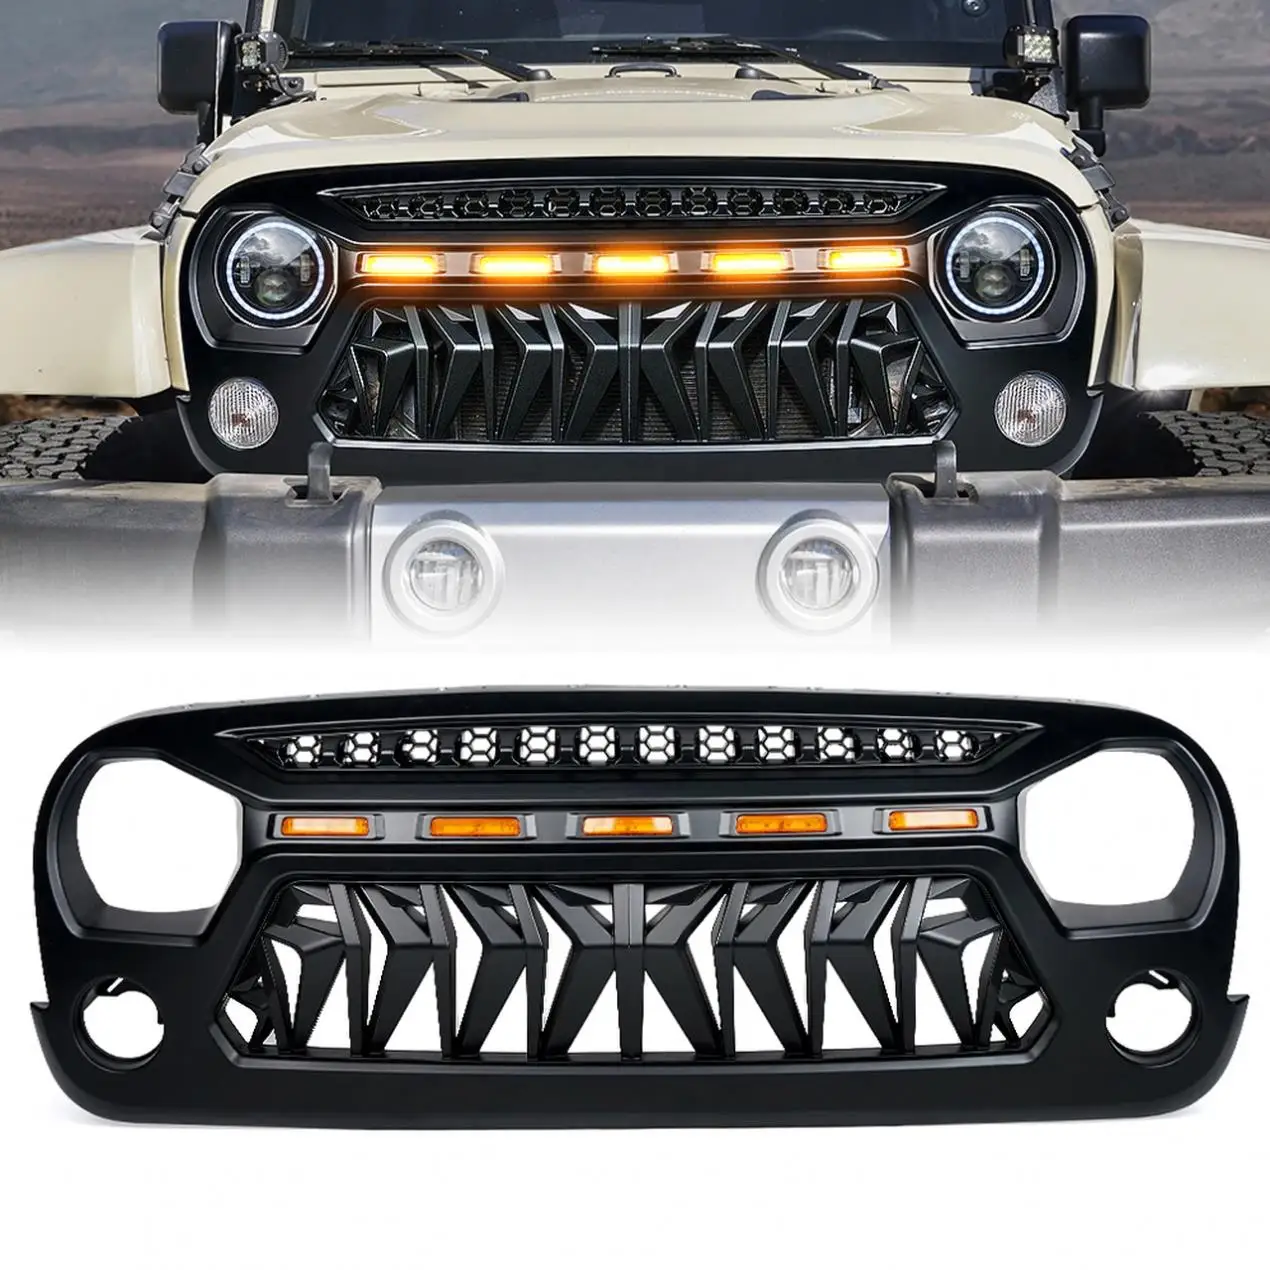 Spedking Jk Accessories 4x4 Offroad Front Car Grille For Jeep Wrangler -  Buy Grille For Jeep Wrangler,Jk Car Grille,For Jeep Wrangler Jk Accessories  Product on 